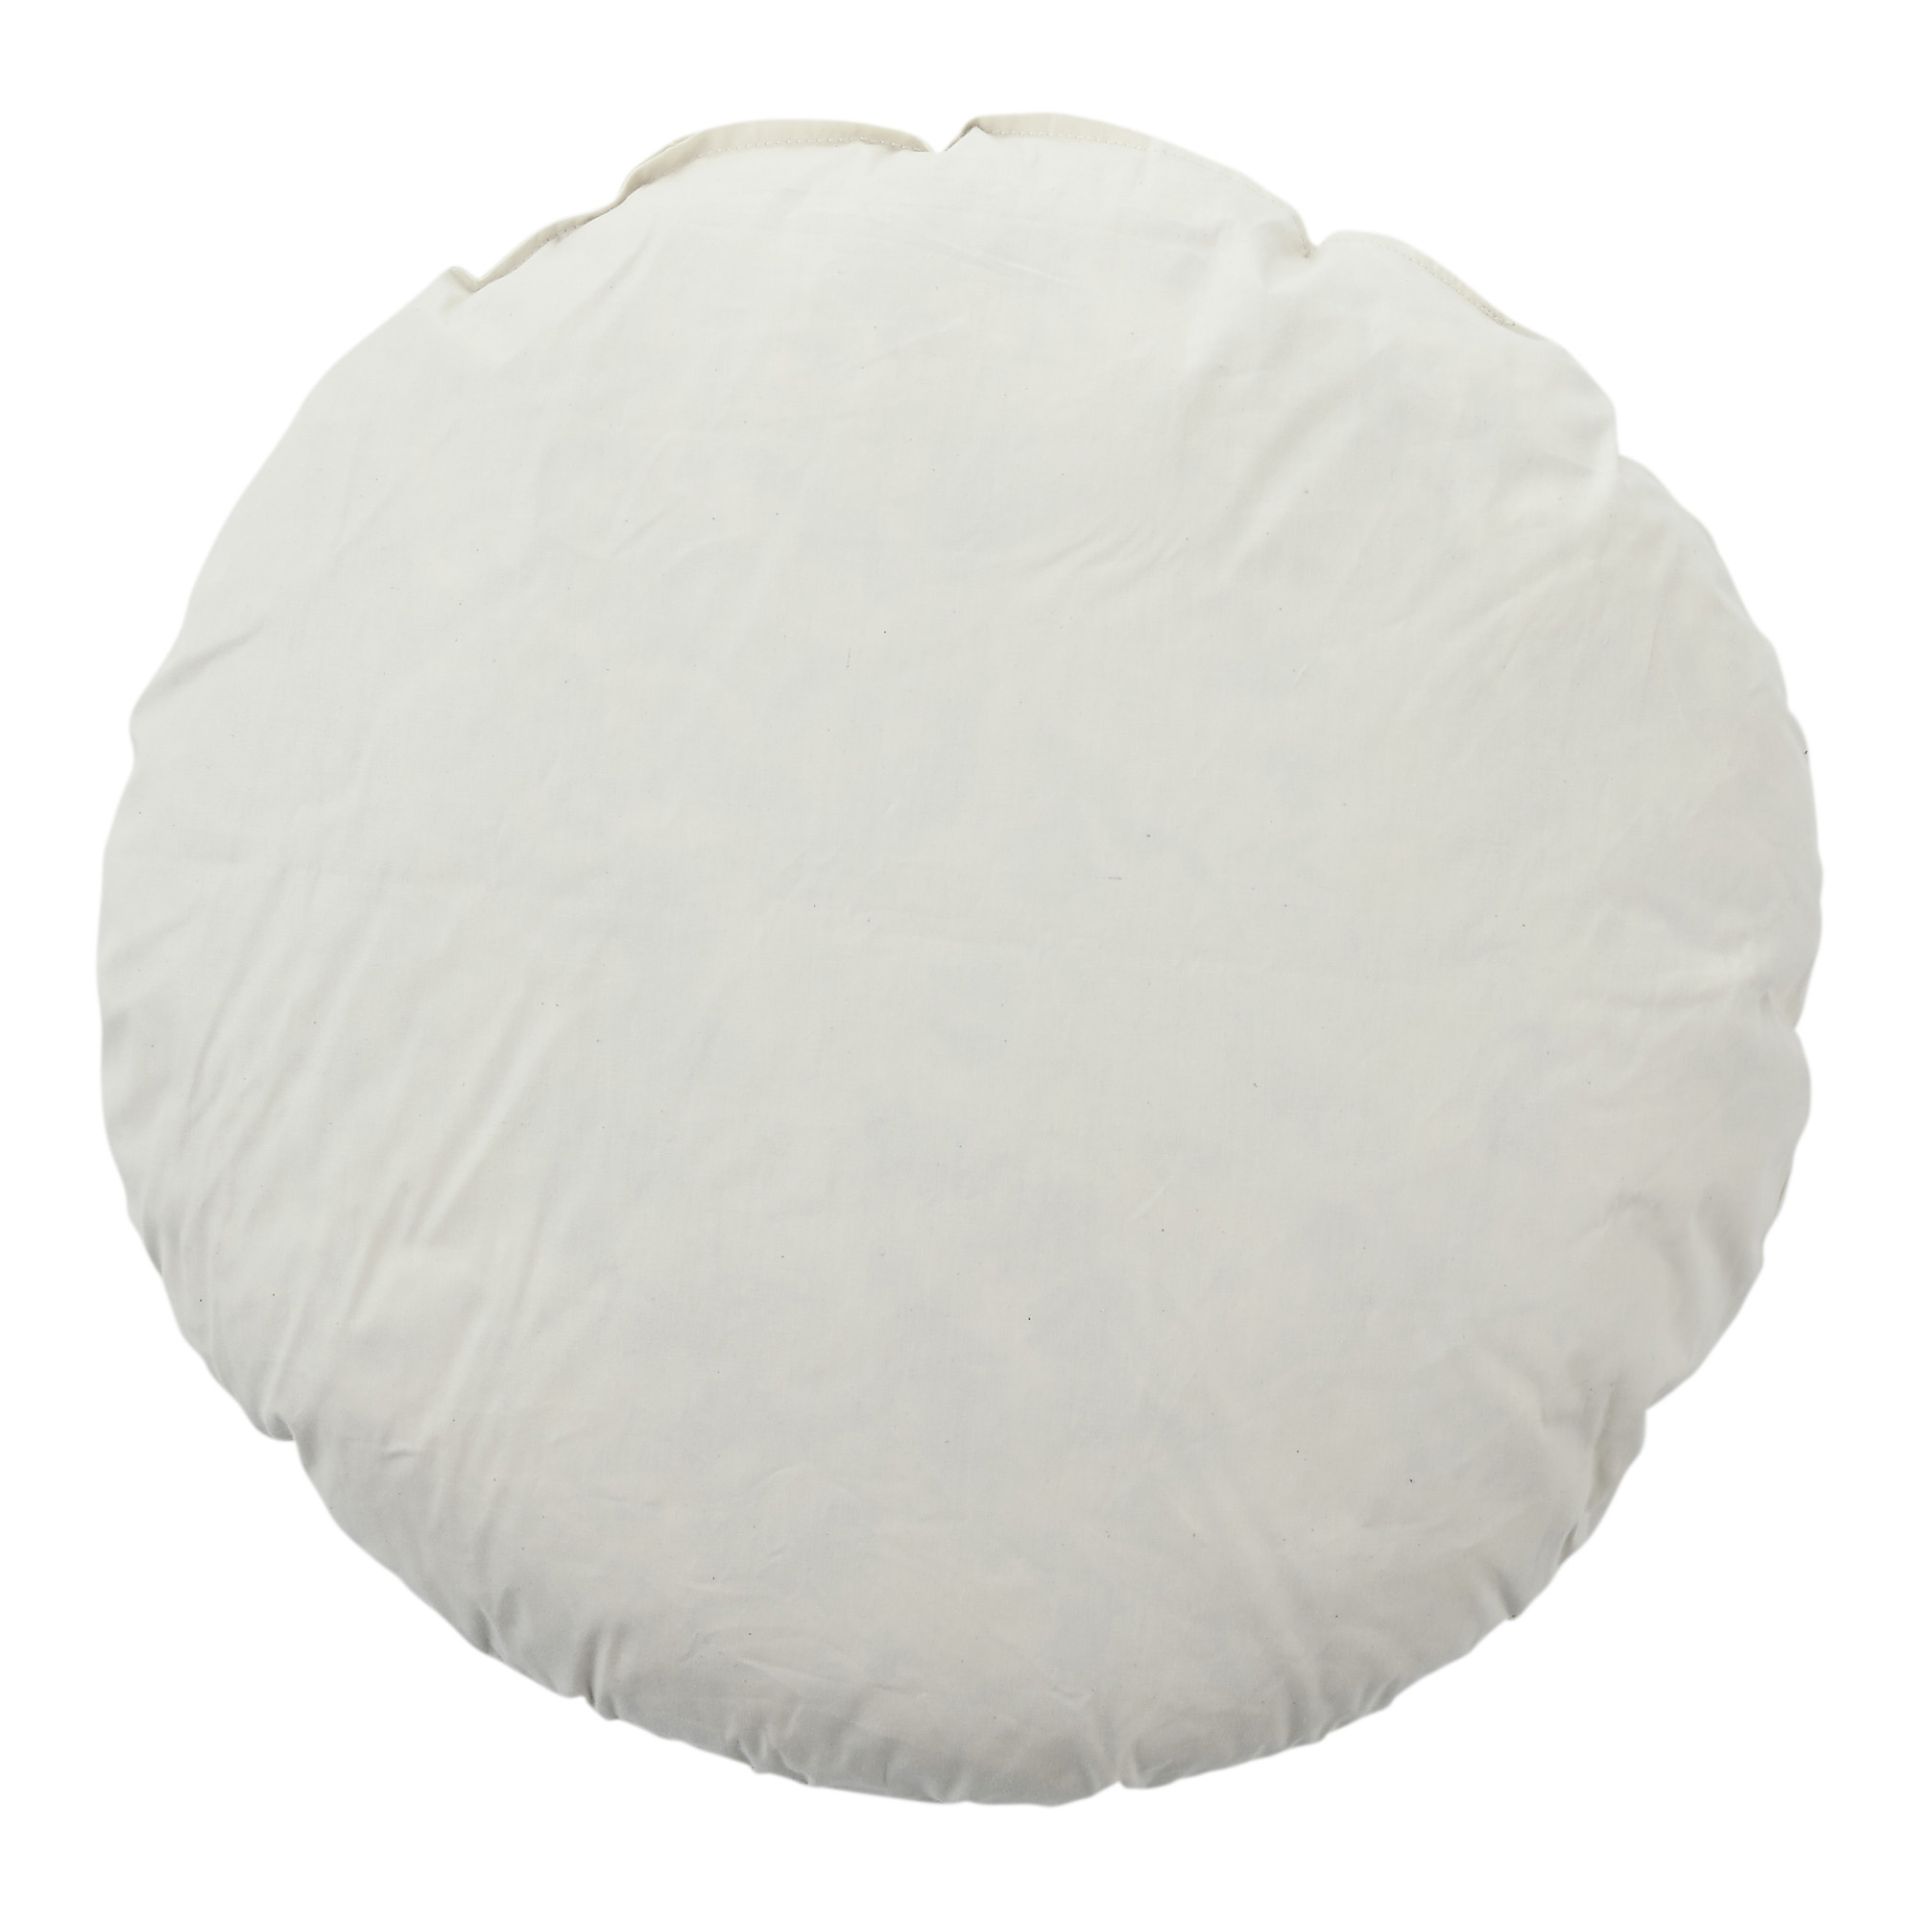 Inner cushion 40cm Rond With feather filling